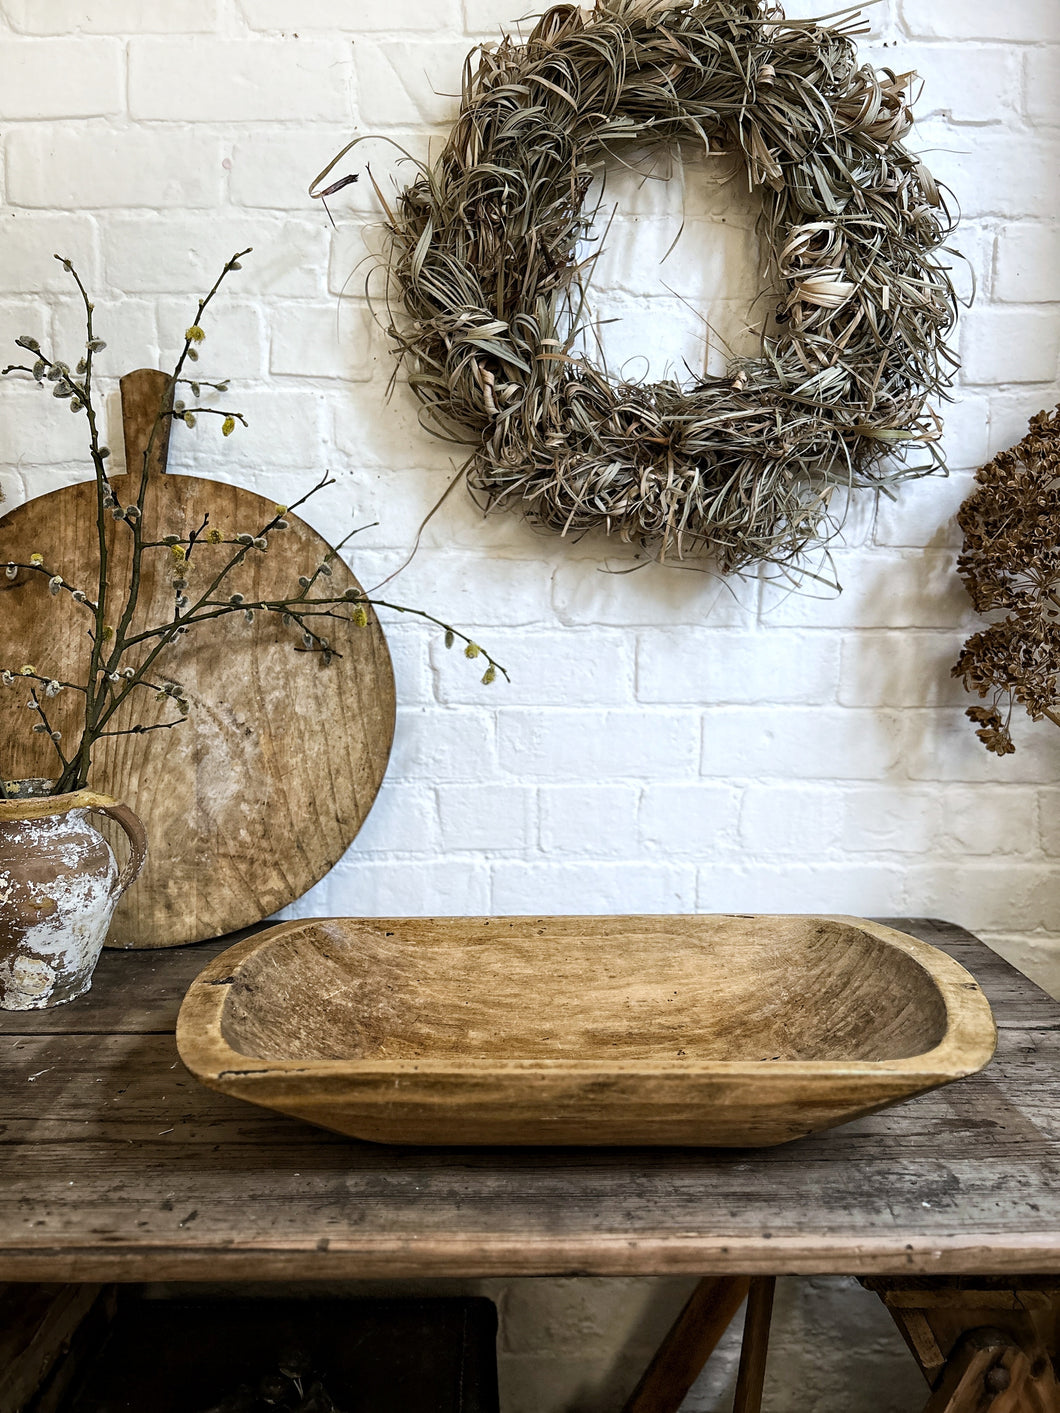 A rustic hand carved wooden antique dough bowl